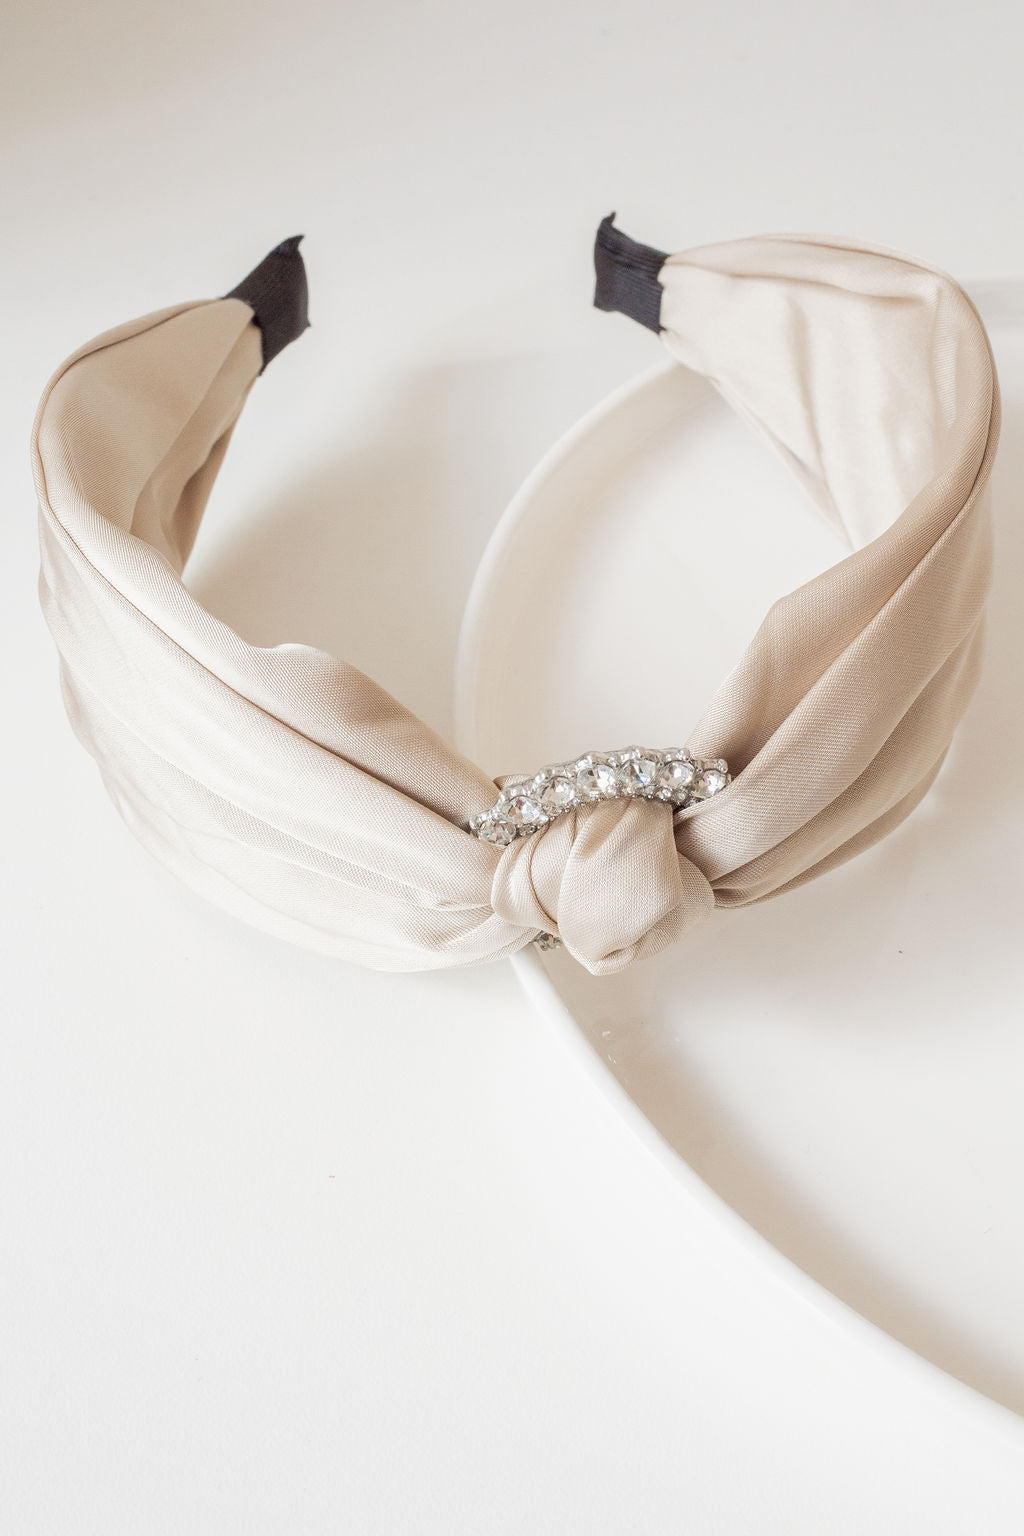 Buckle Knotted Satin Alice Band